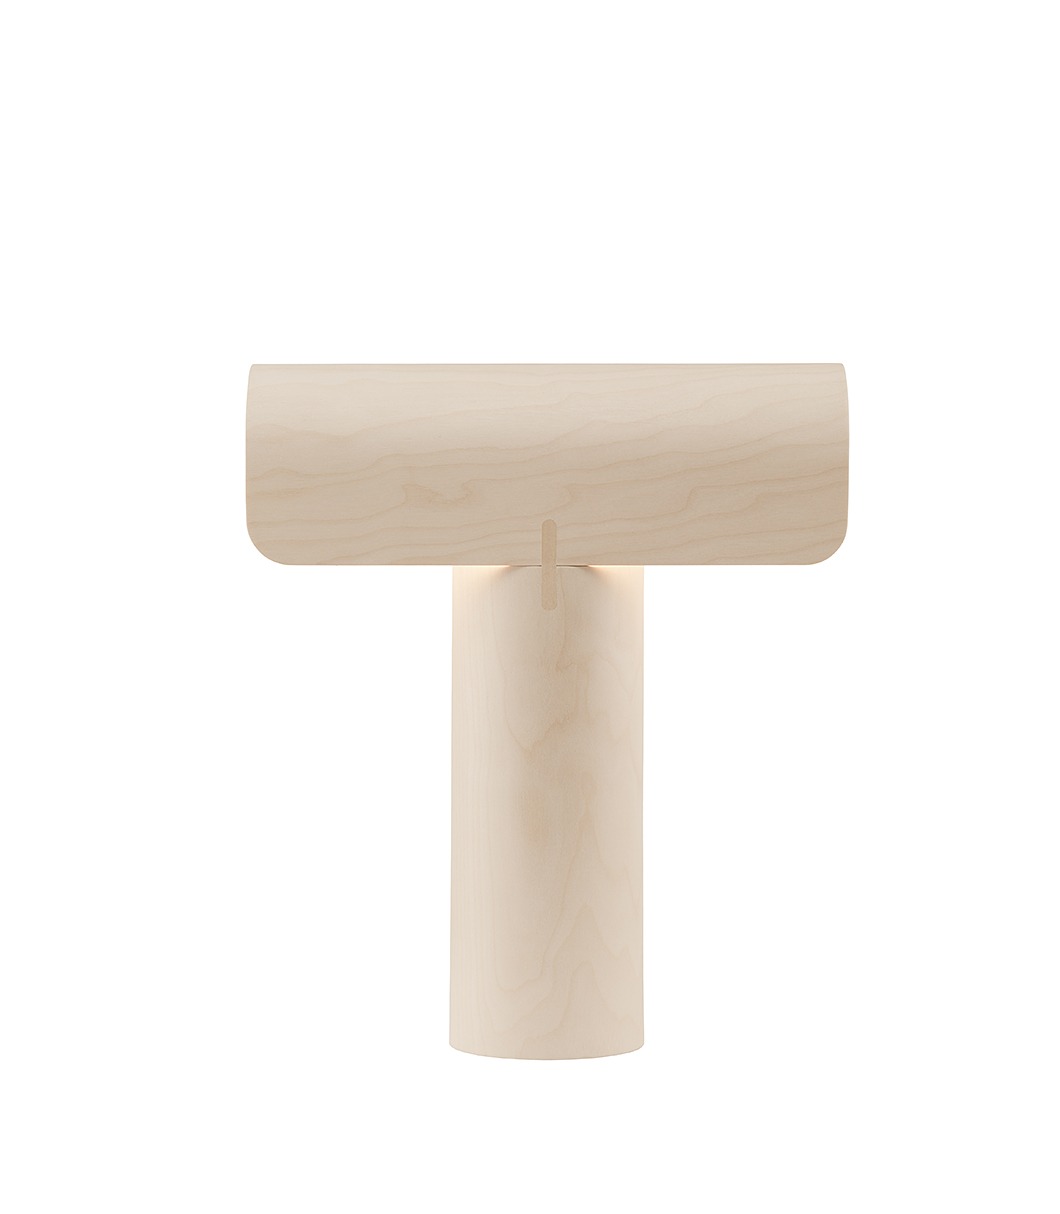 Teelo 8020 table lamp is available in natural birch